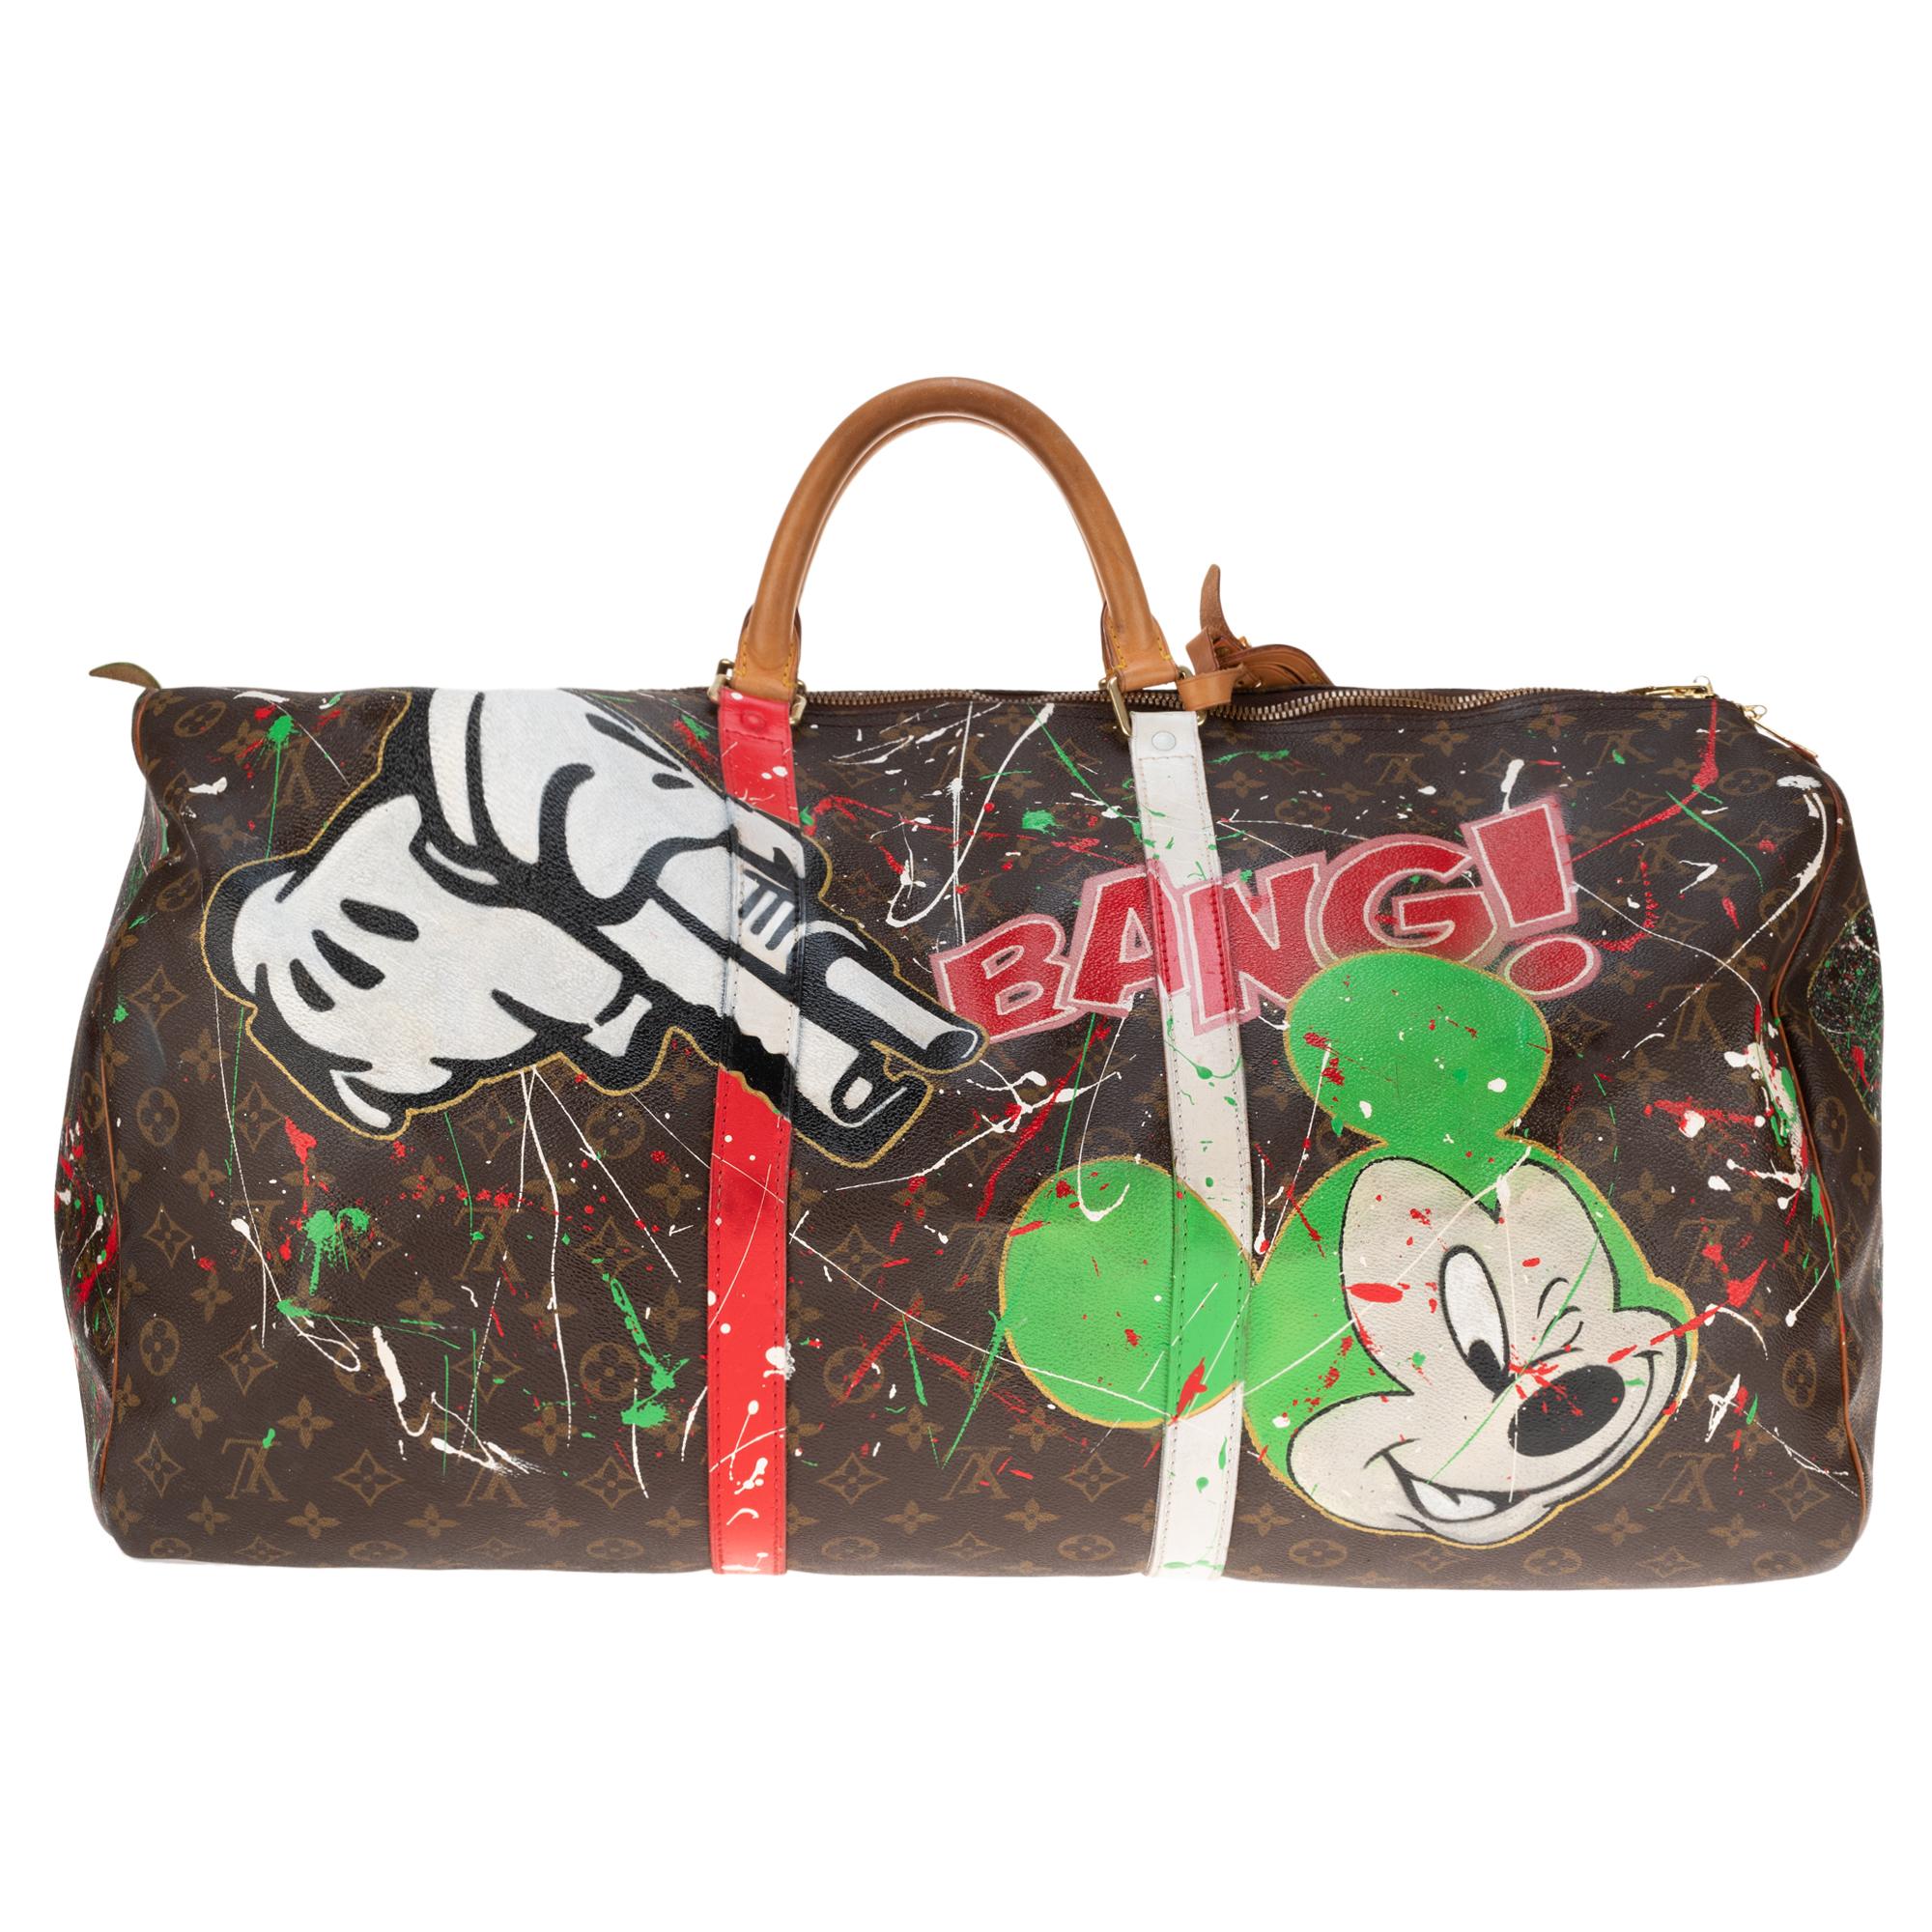 Exceptional travel bag Louis Vuitton Keepall 60 cm in brown Monogram canvas and natural leather customized by our artist of the Street Art PatBo on the theme of Disney.
Gold-plated metal trim, double natural leather handle for hand-carrying.
Double